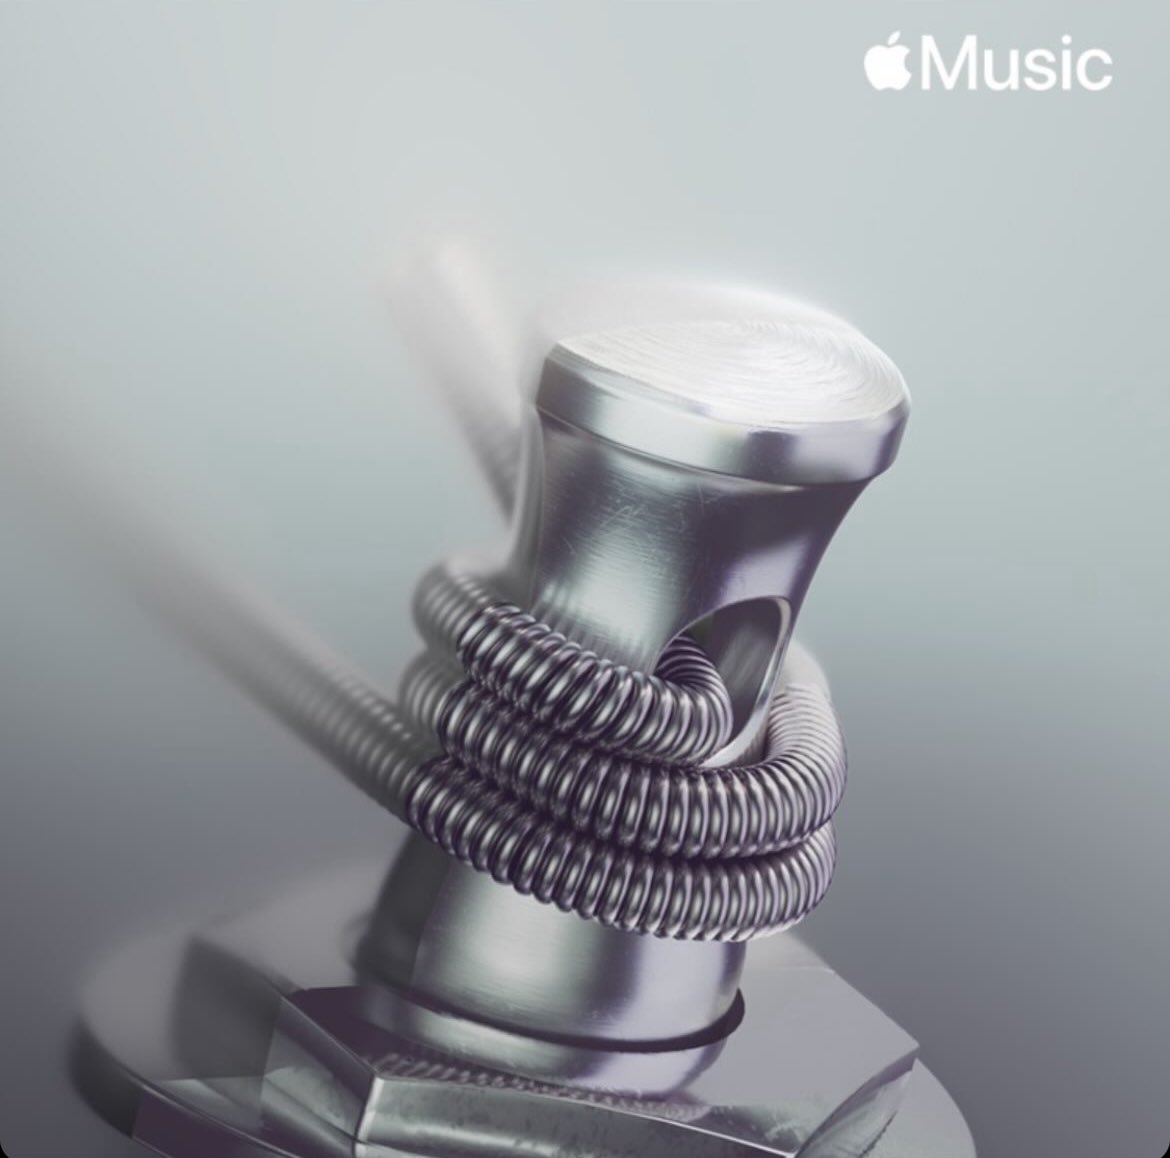 Check out our new song “I Could Be” on Apple Music’s New In Rock playlist…